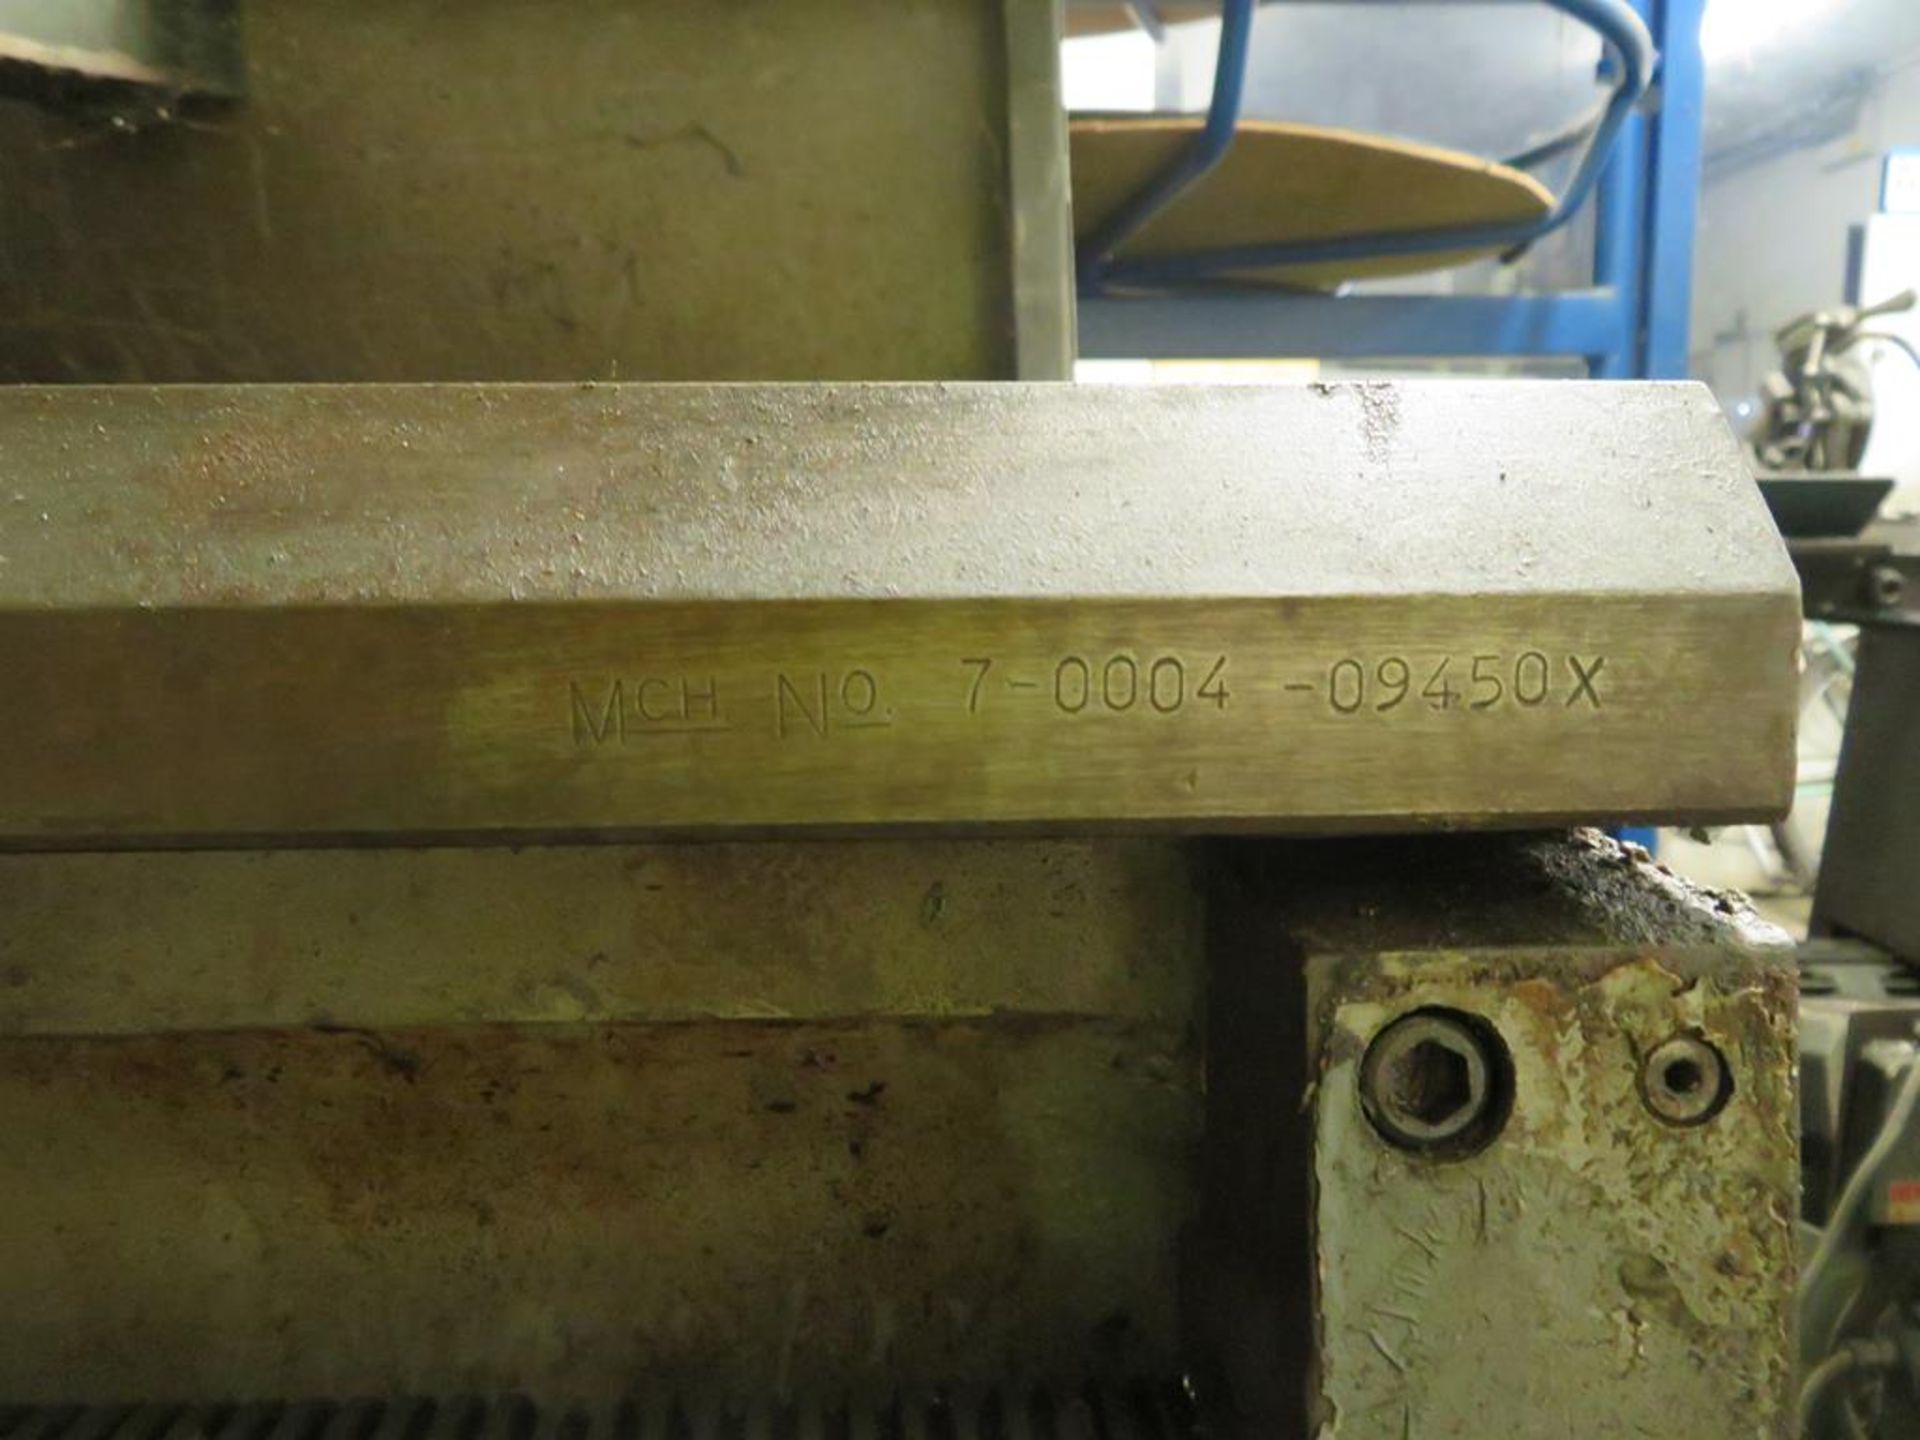 Colchester Mascot 1600 Gap Bed Lathe - Image 3 of 3